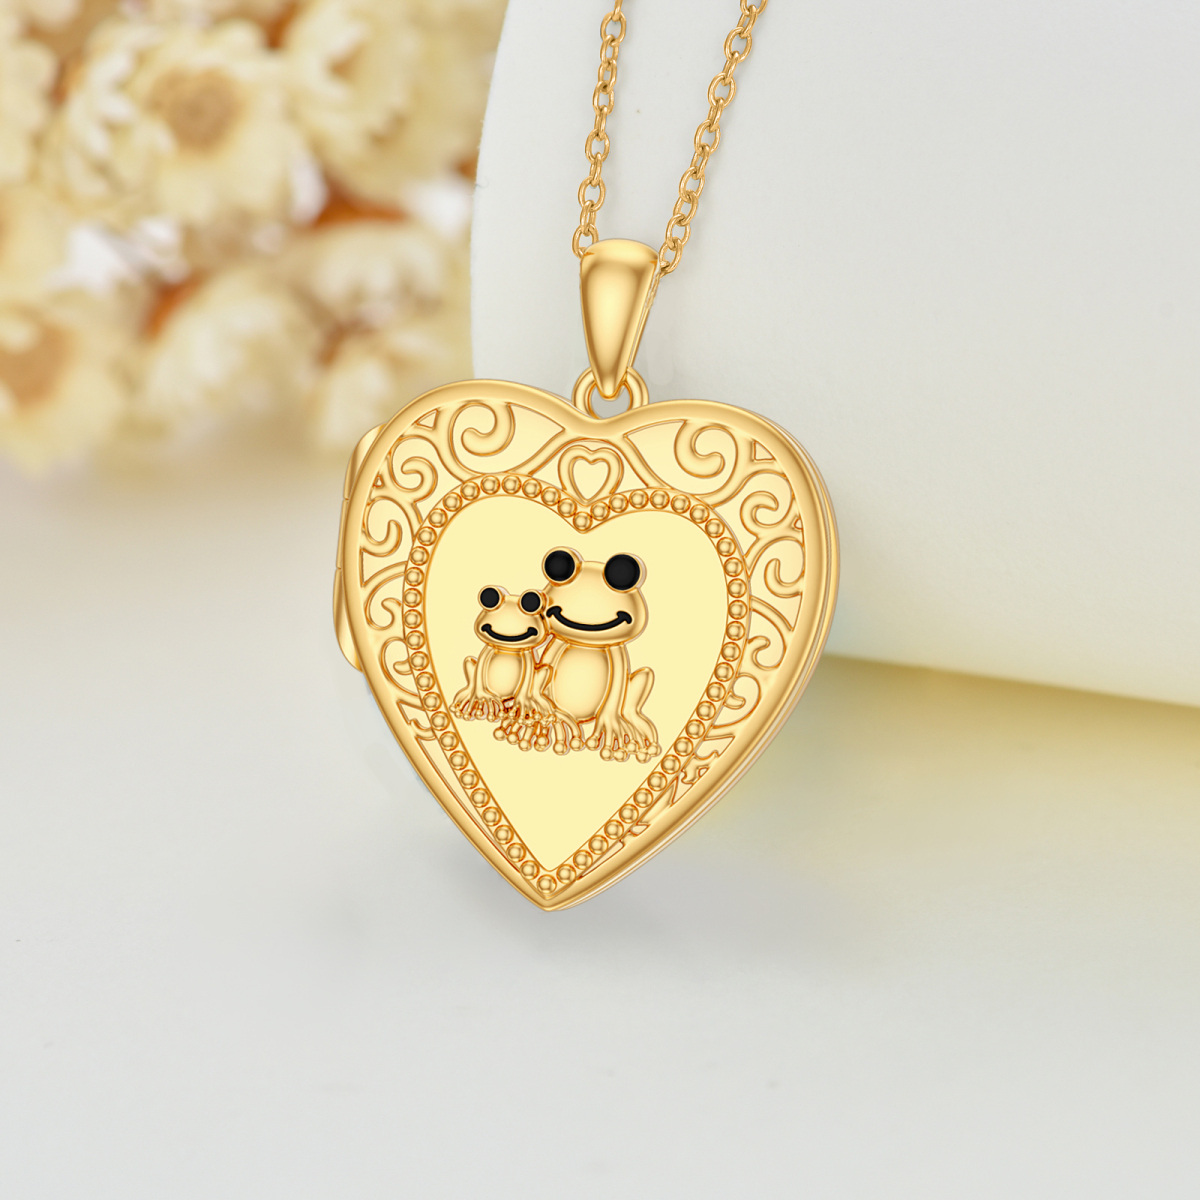 10K Gold Frog Heart Personalized Engraving Photo Pendant Necklace-5